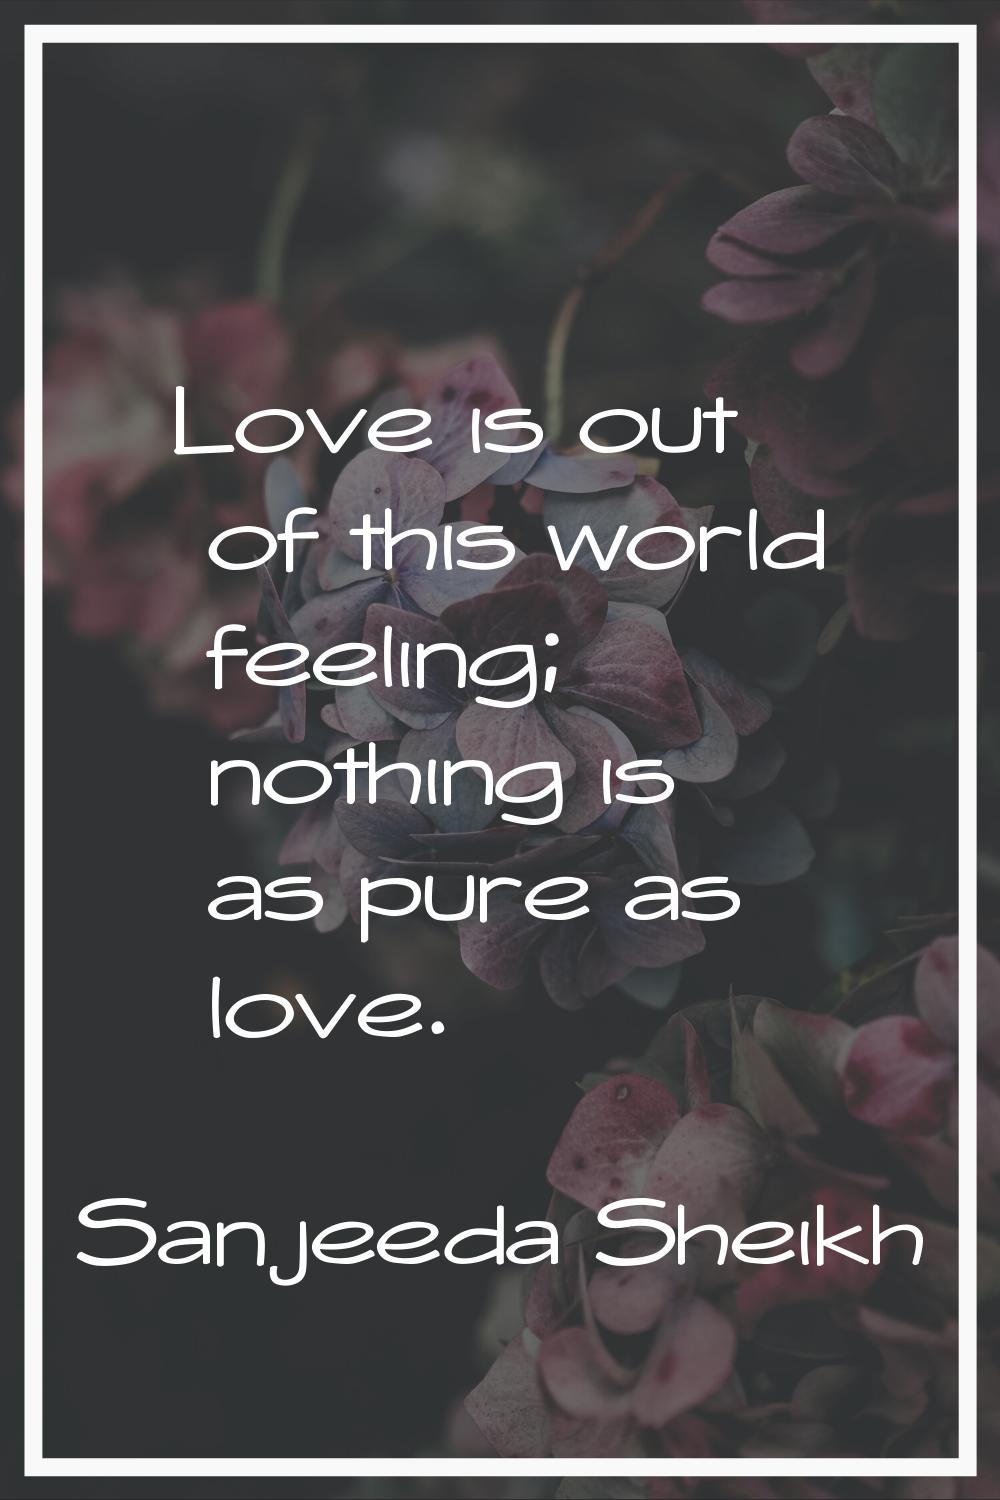 Love is out of this world feeling; nothing is as pure as love.